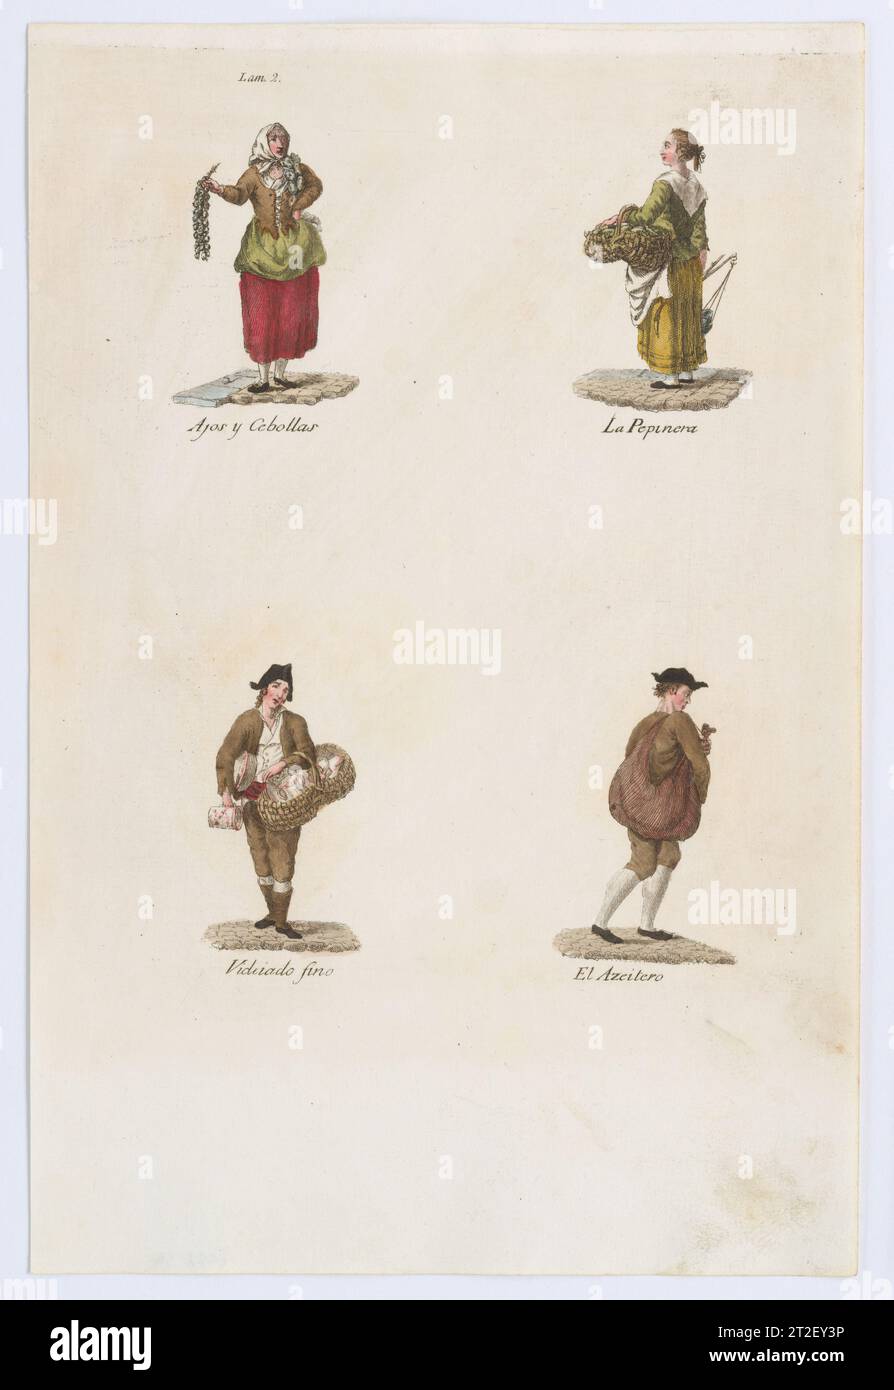 Plate 2: four street vendors from Madrid selling garlic and onions, cucumbers, fine crockery, oil, from 'Los Gritos de Madrid' (The Cries of Madrid) Miguel Gamborino Spanish Publisher Imprenta Real, Madrid Spanish 1809–17 The second in a group of eighteen hand-coloured engravings with a total of 72 figures representing the cries (trades/street vendors) of Madrid. Their occupations are many, and include everything from fish mongers, fruit and sweet vendors to those selling household items (chairs, pots, matts etc). This set is the first edition before each sheet was cut into four and the figure Stock Photo